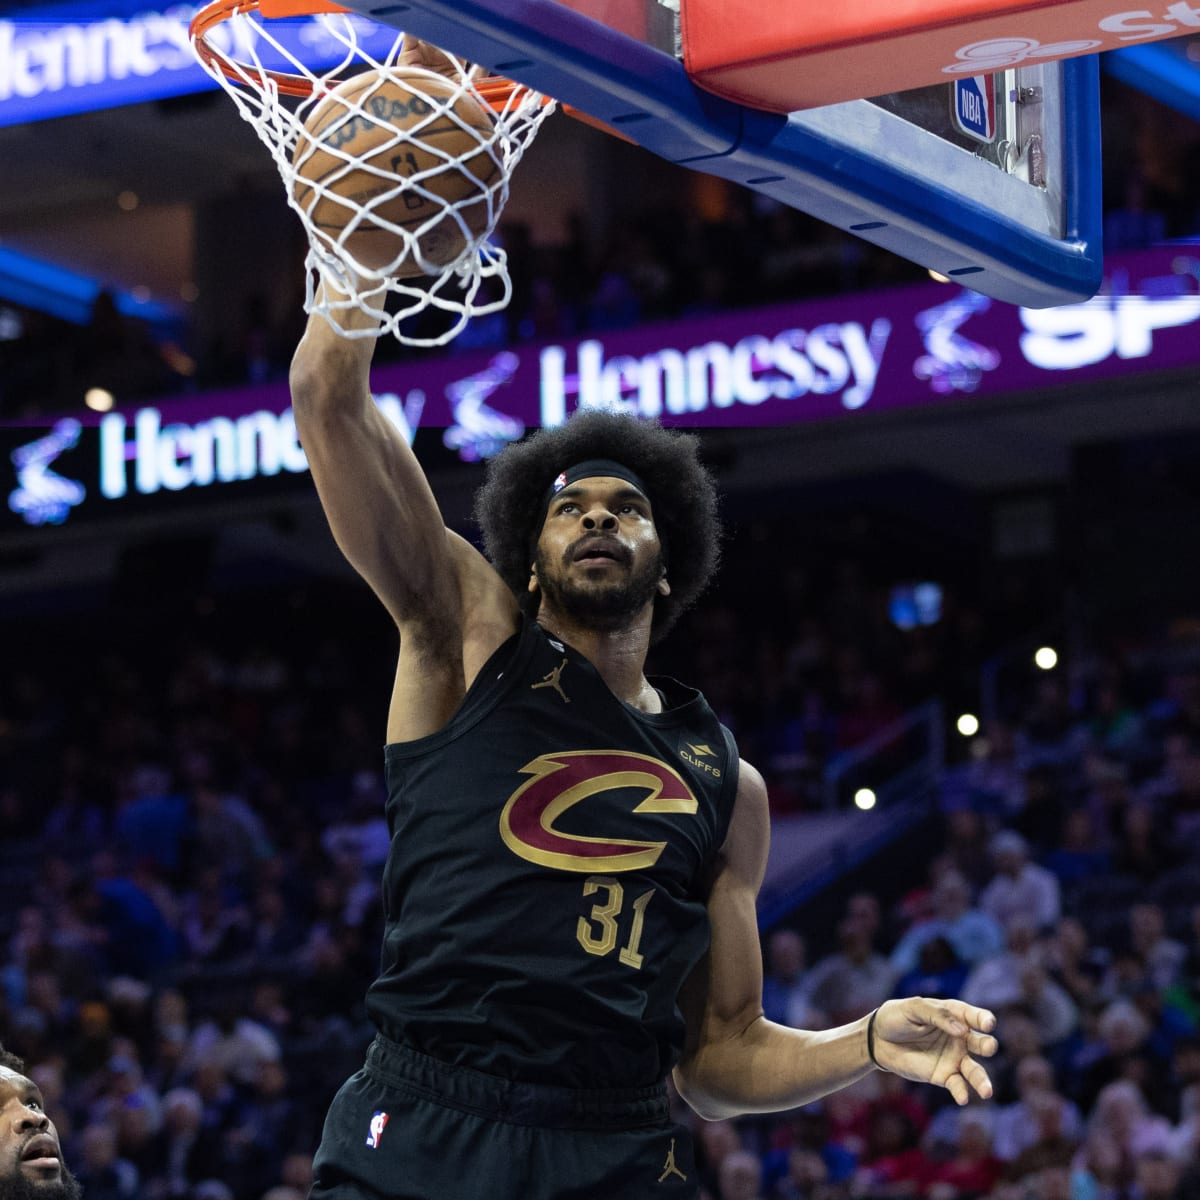 Jarrett Allen sidelined for Cleveland Cavaliers with ankle injury